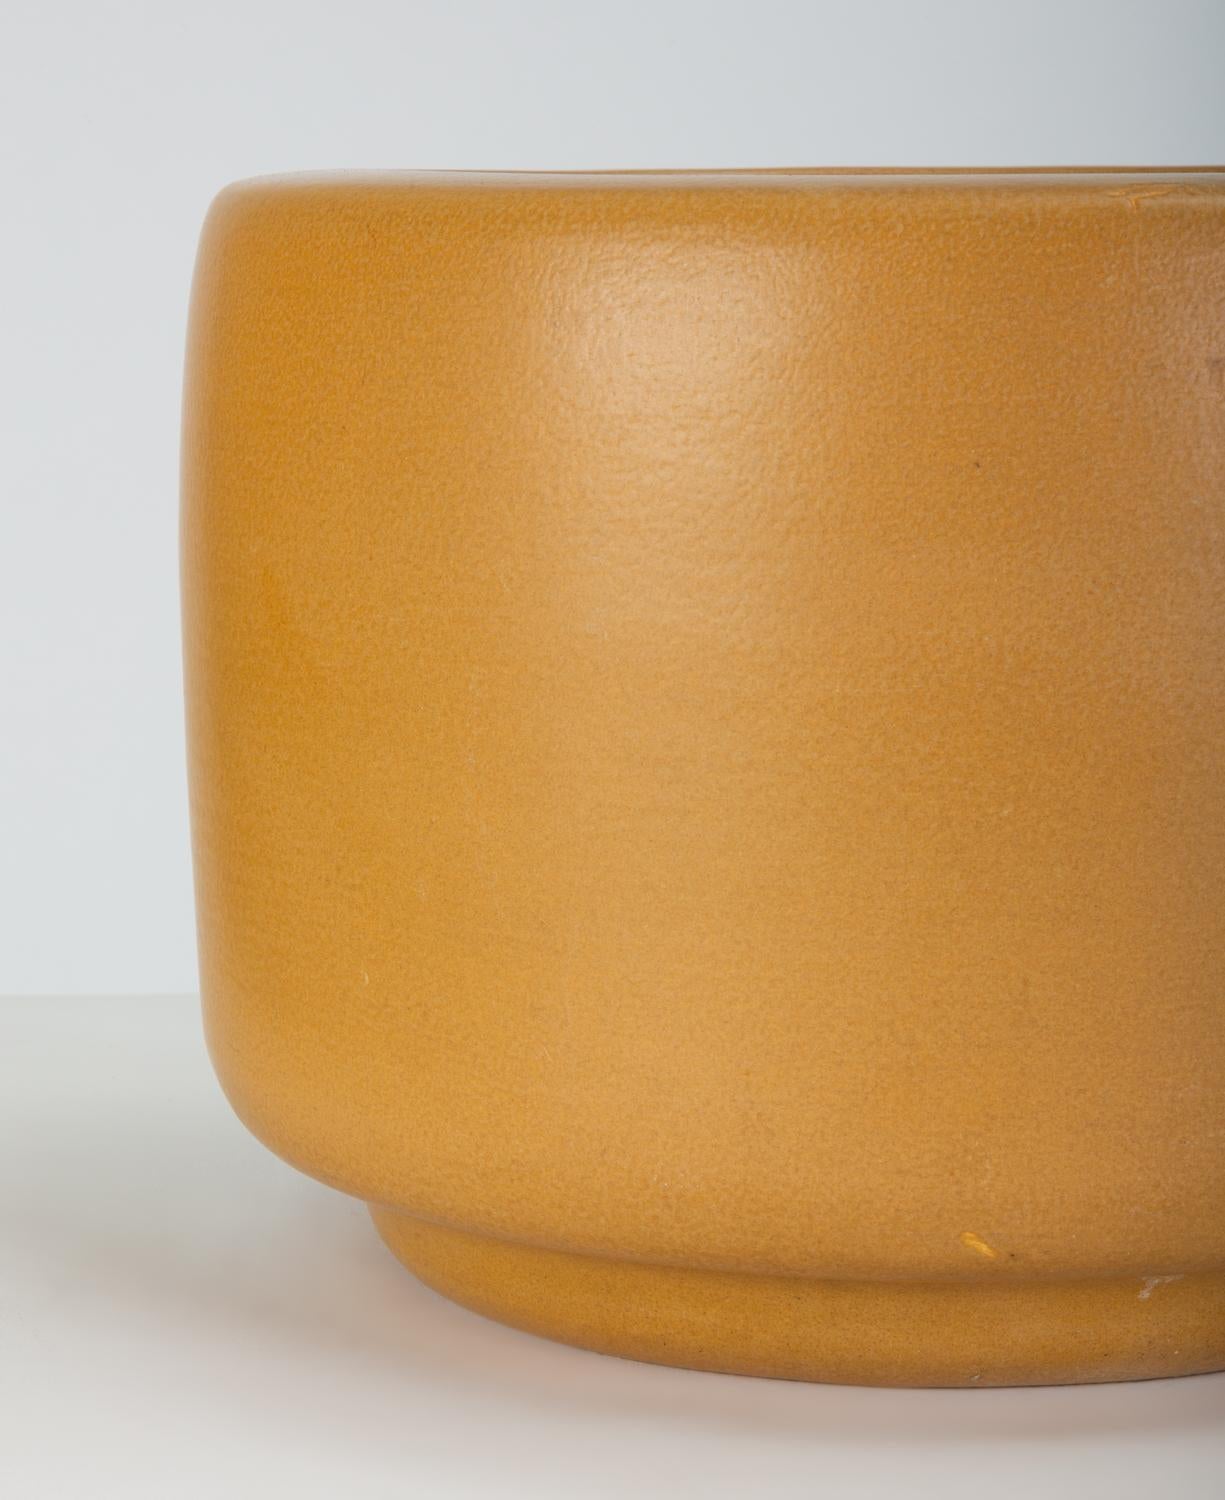 Ceramic CP-13 Tire Planter by John Follis for Architectural Pottery in Yellow Glaze